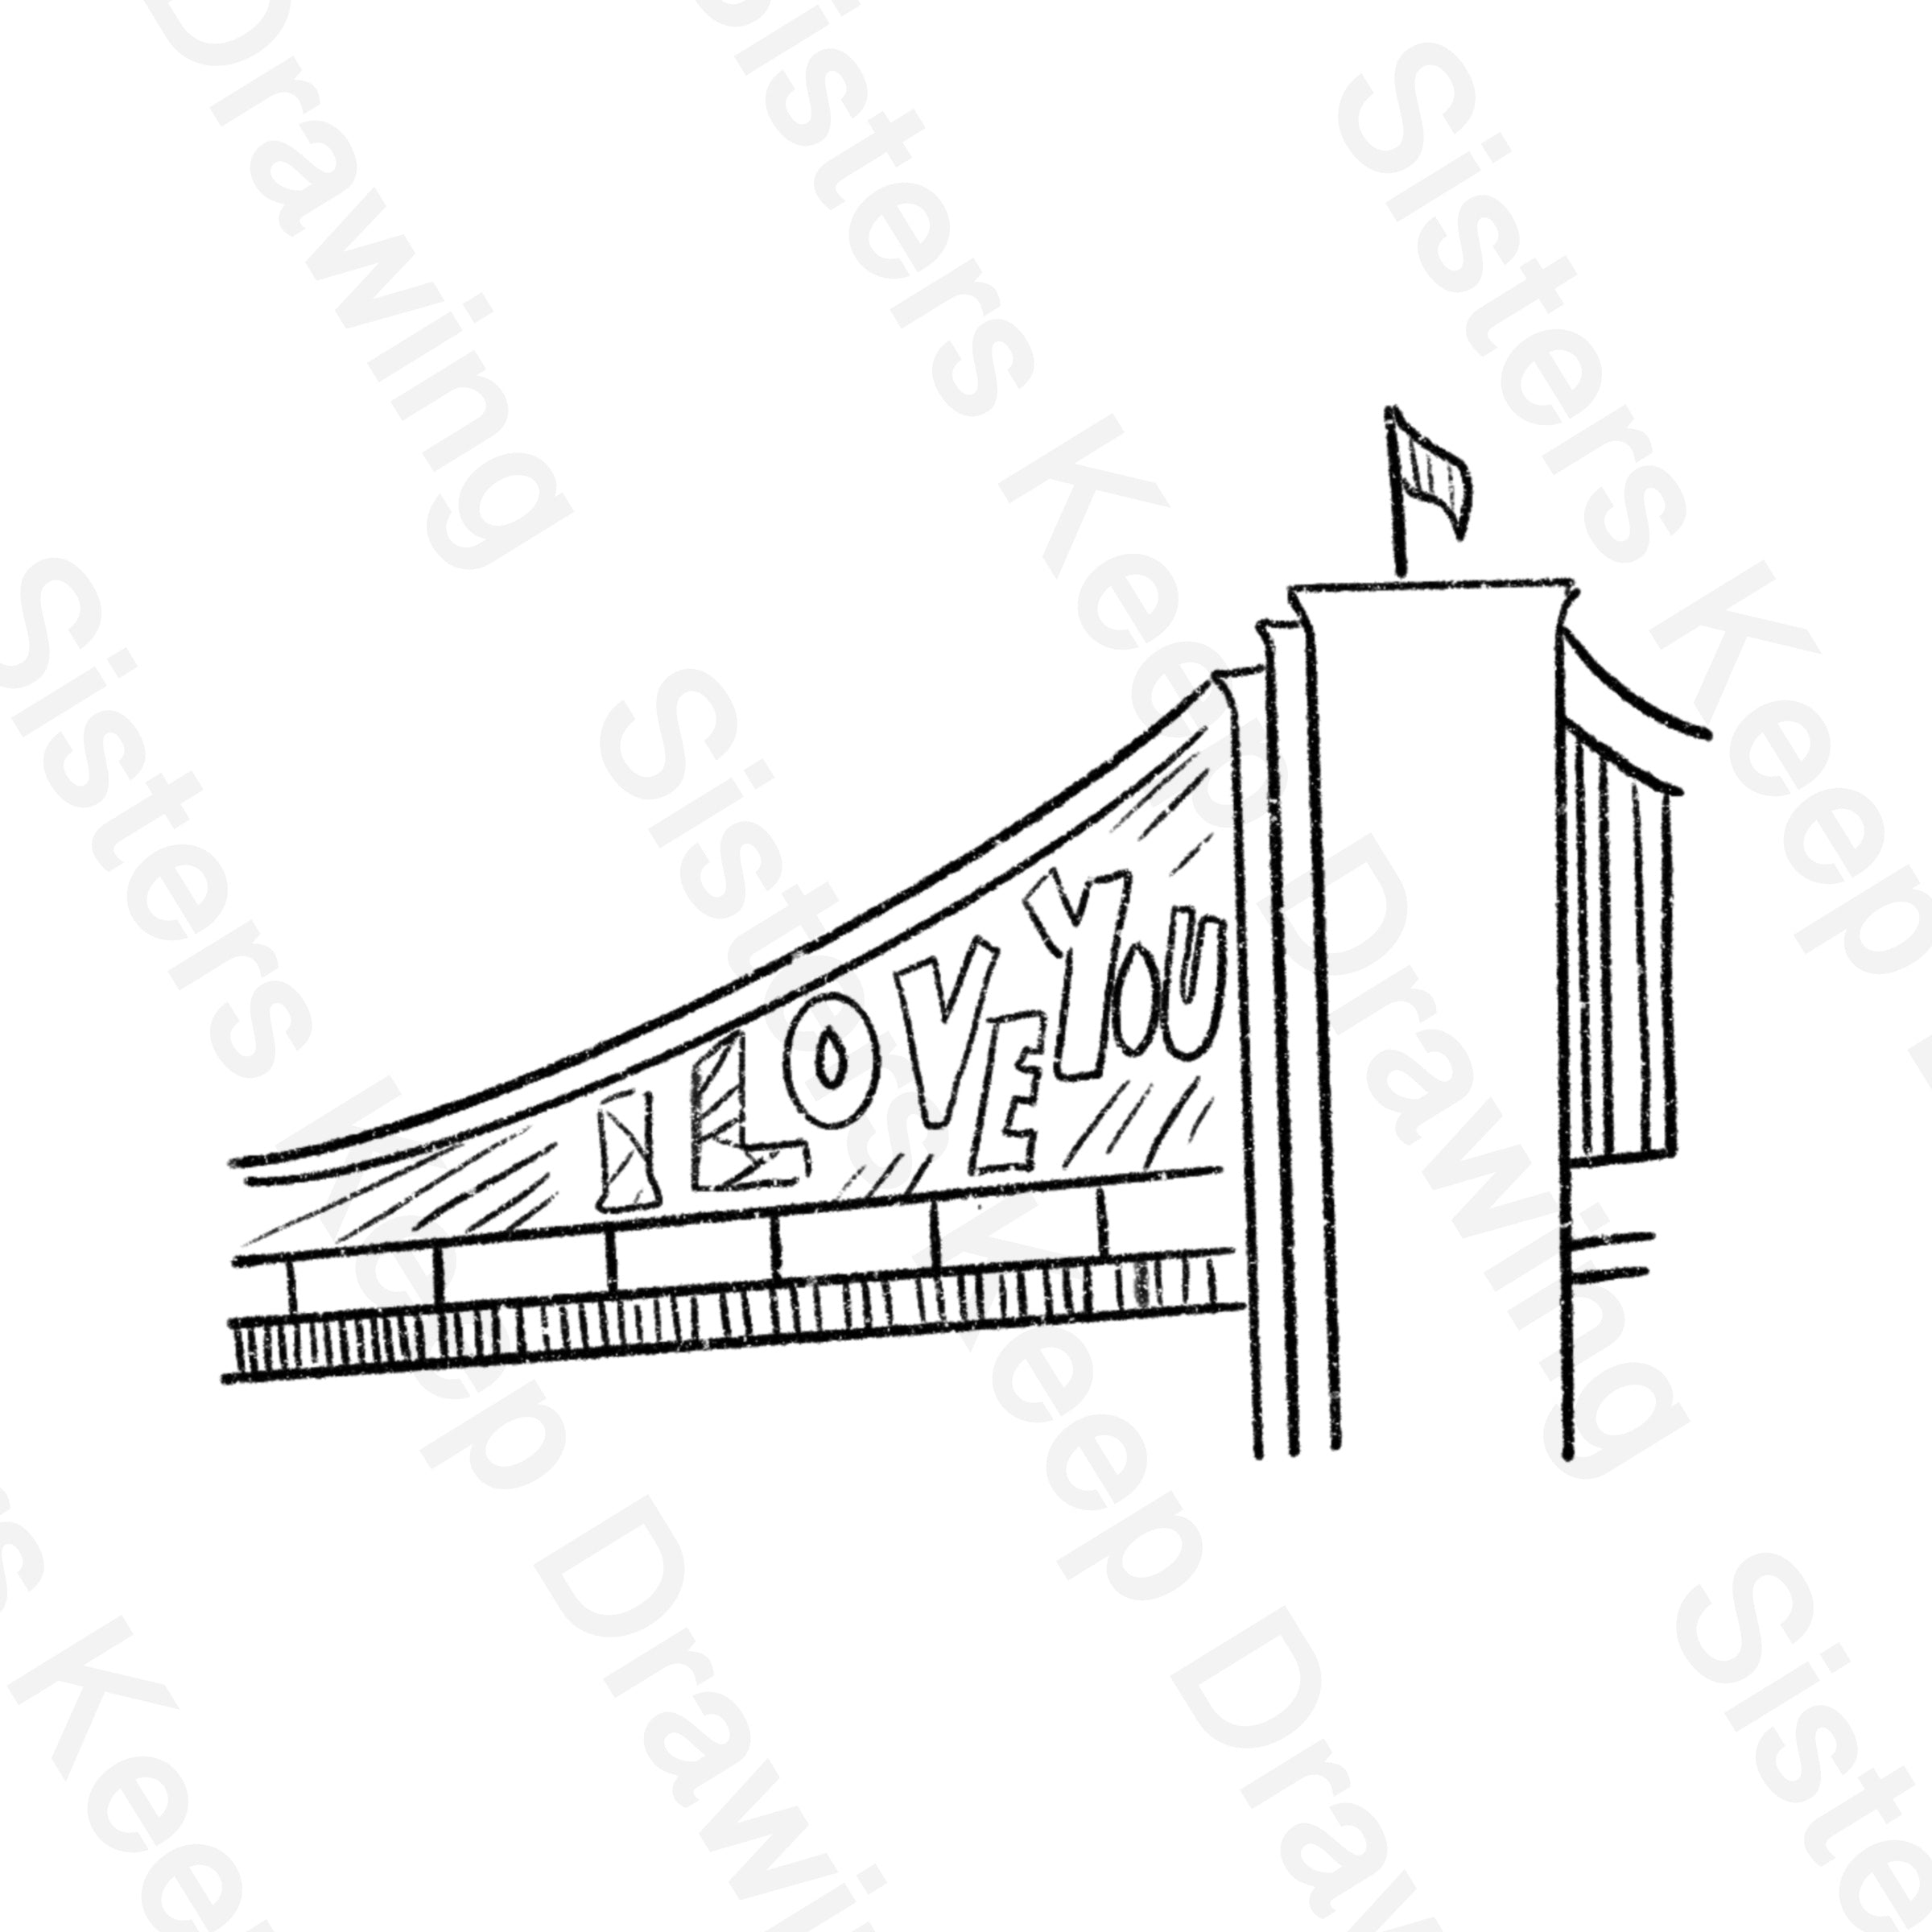 Video for kids - learn how to draw london bridge step by step